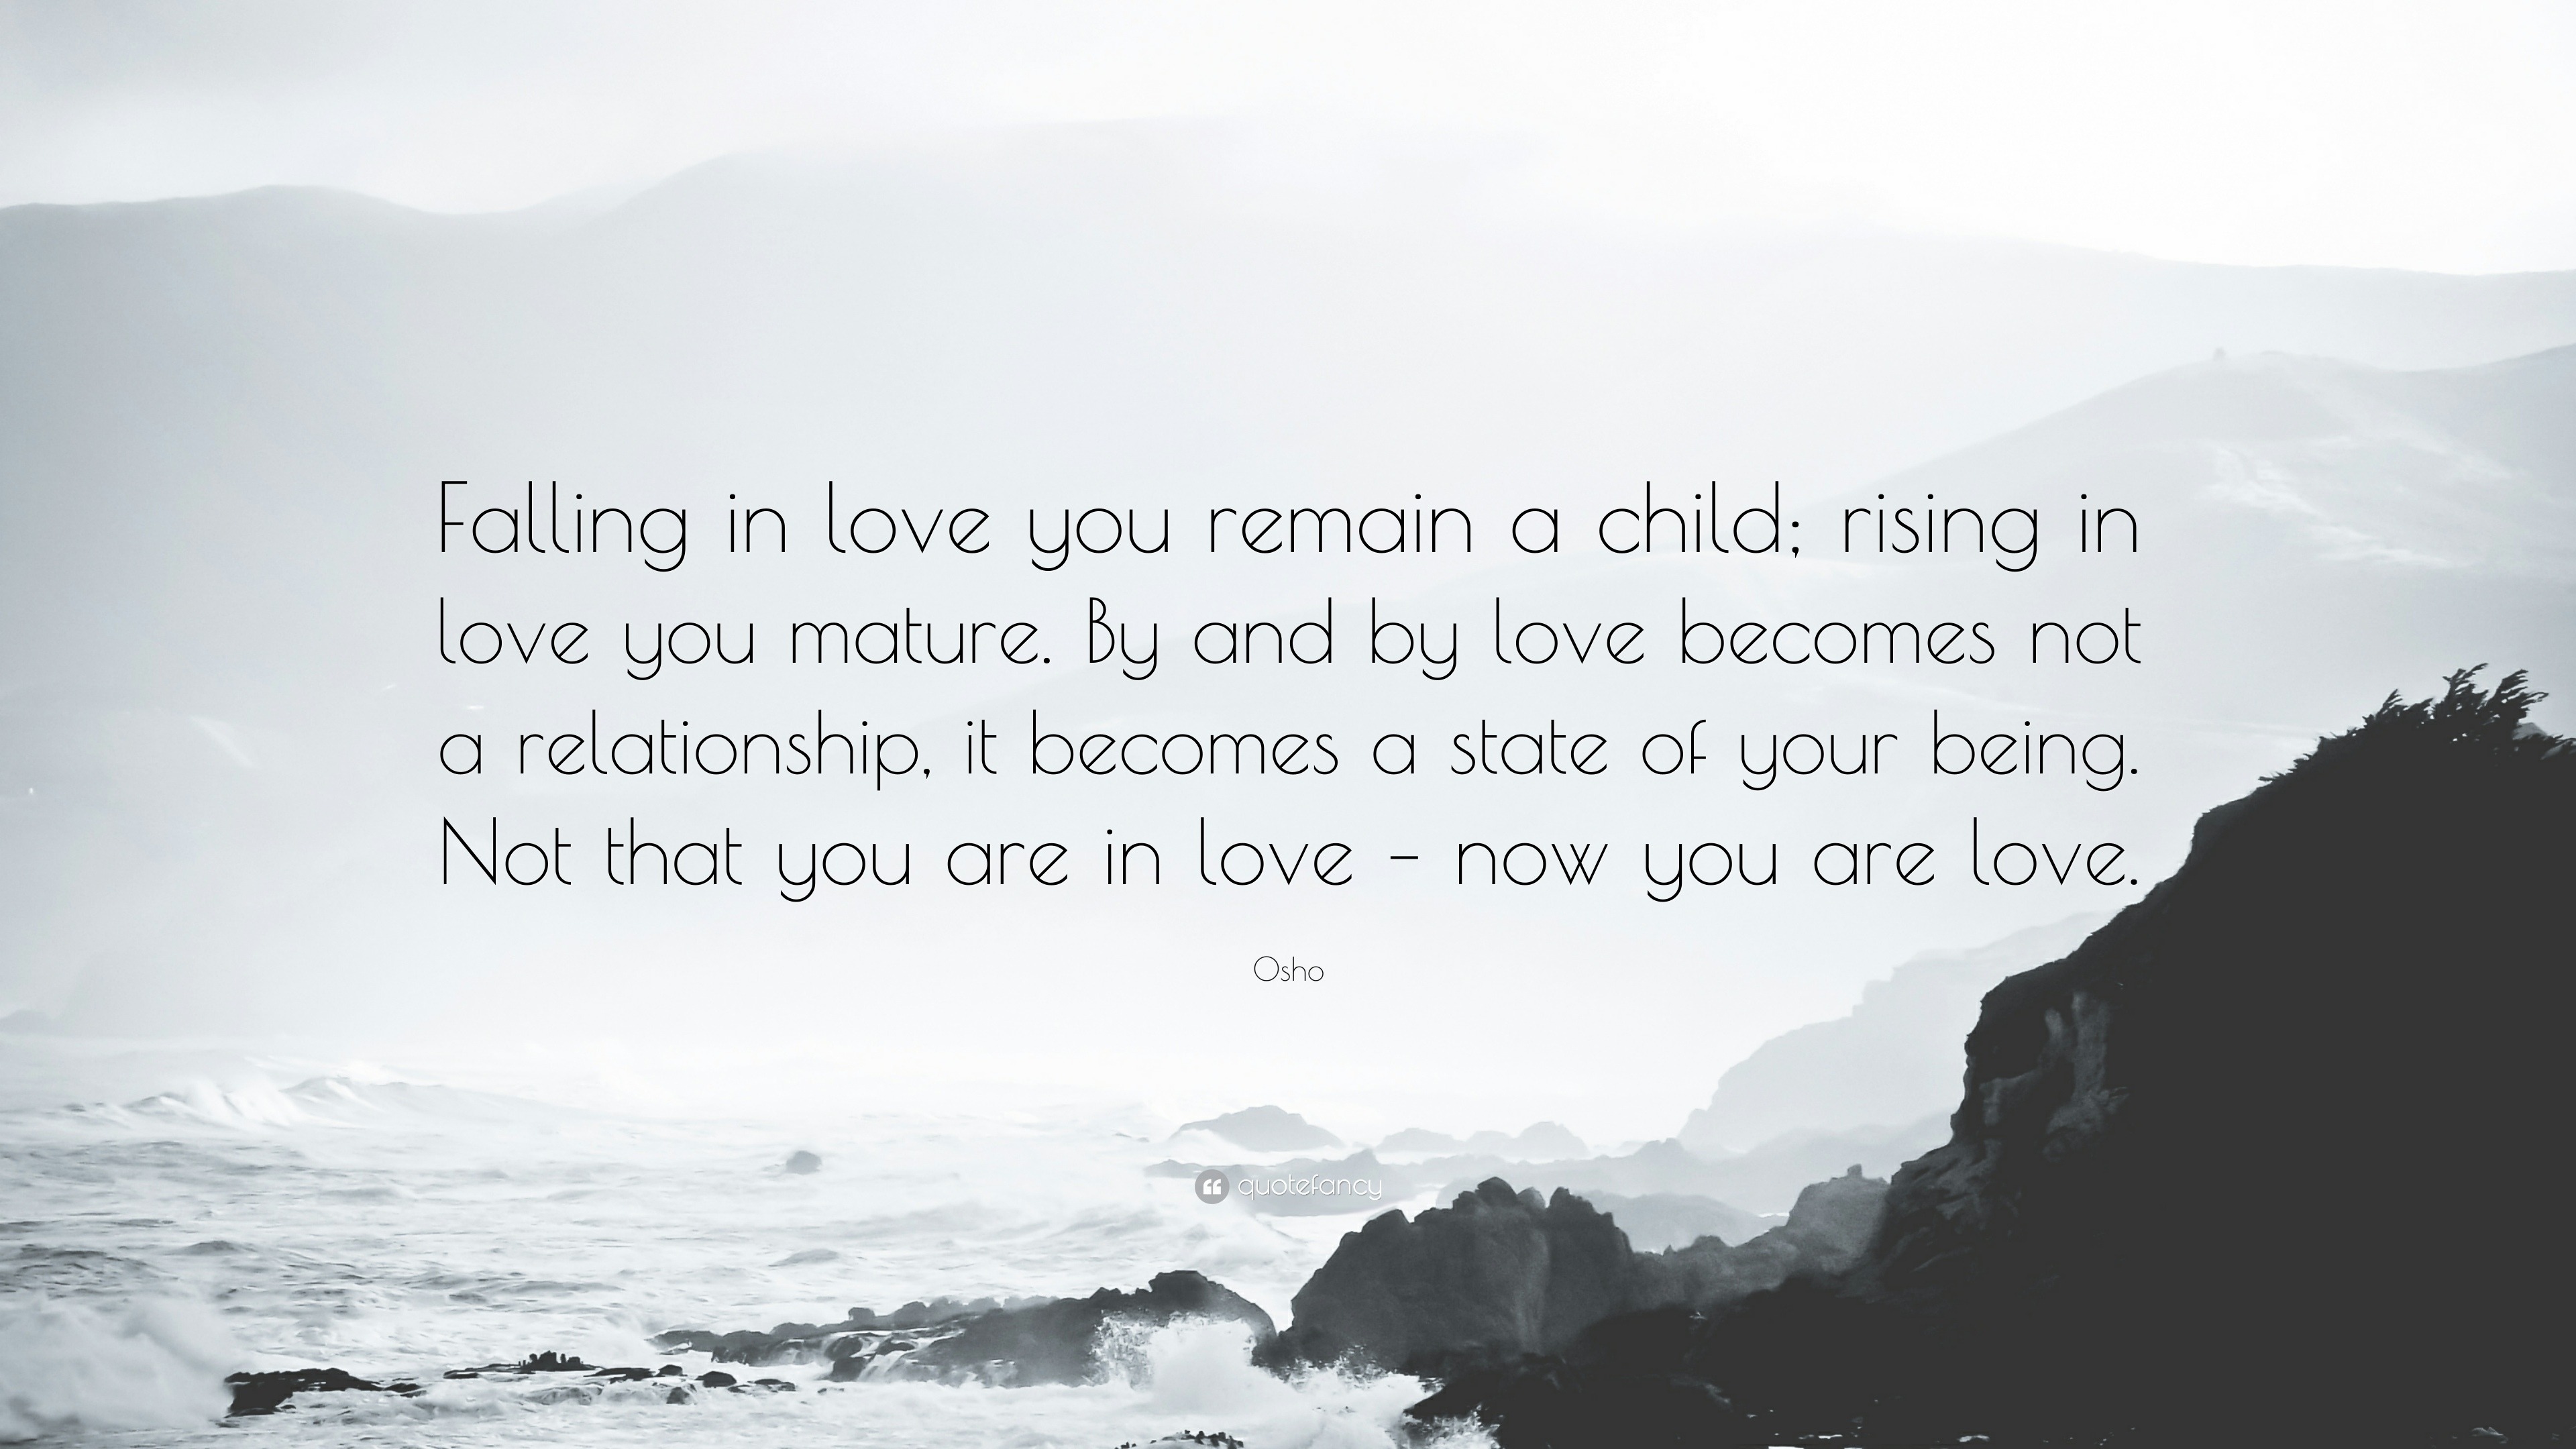 Osho Quote “Falling in love you remain a child rising in love you